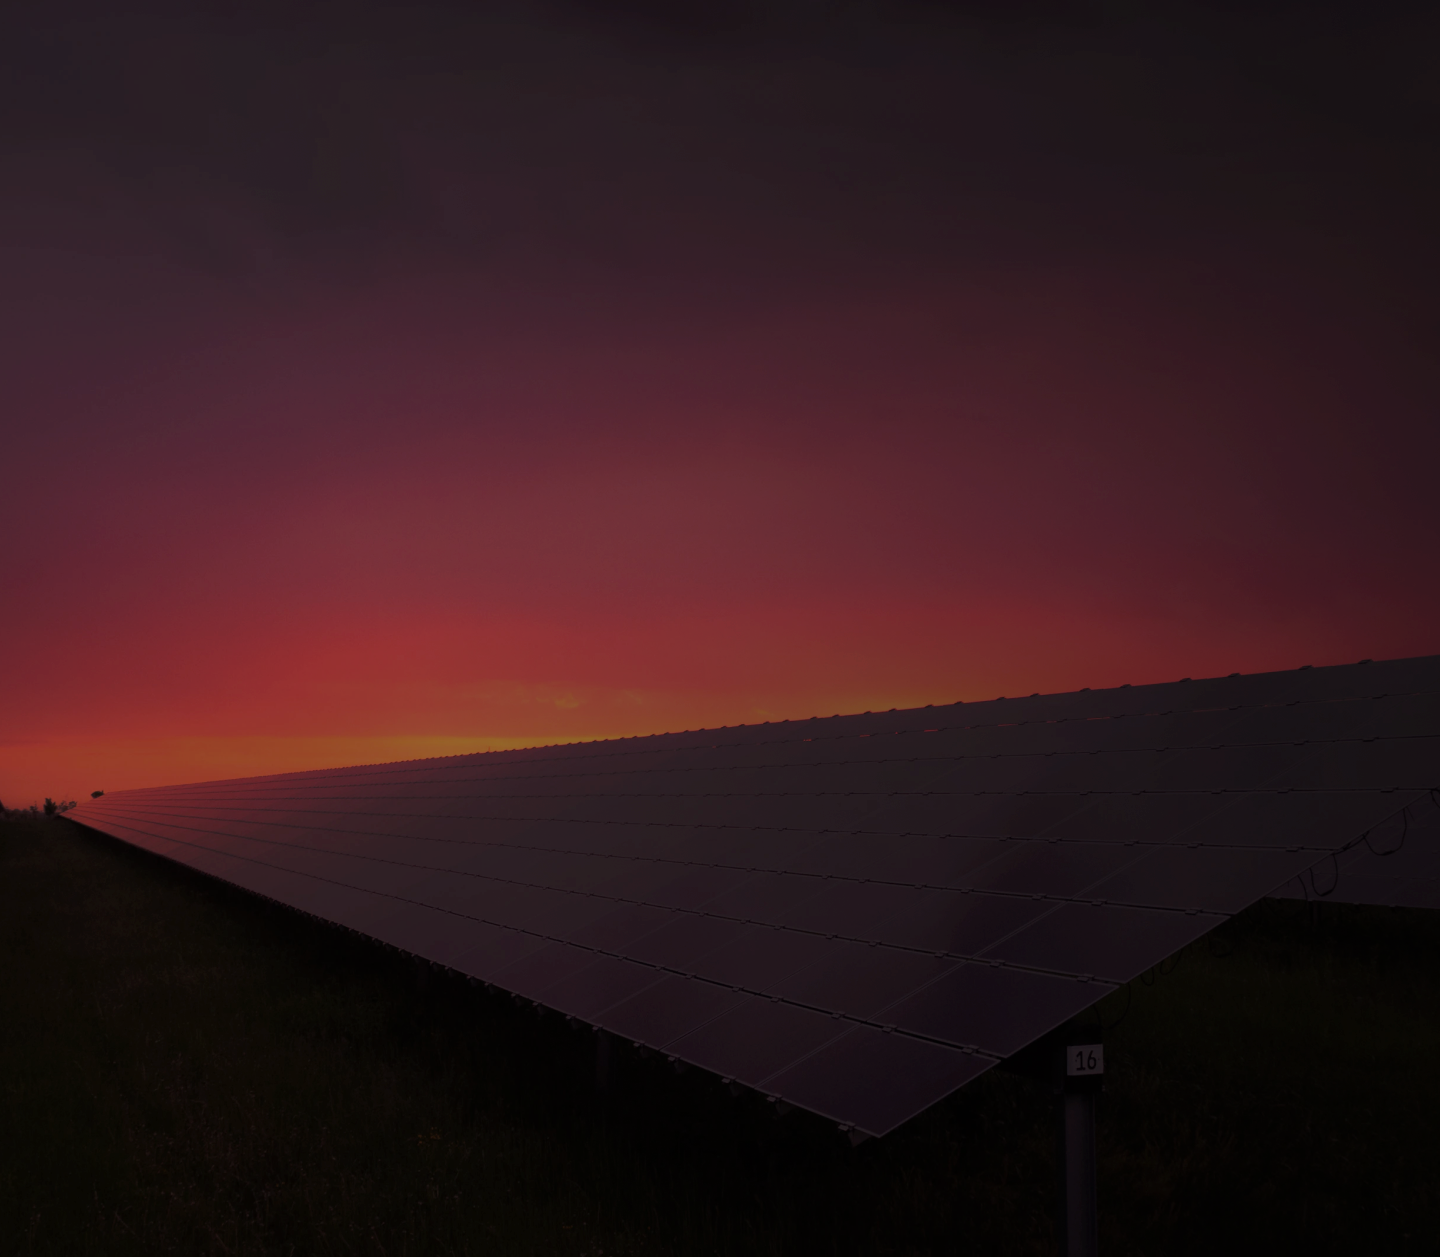 Silhouette of a large solar panel array at sunset